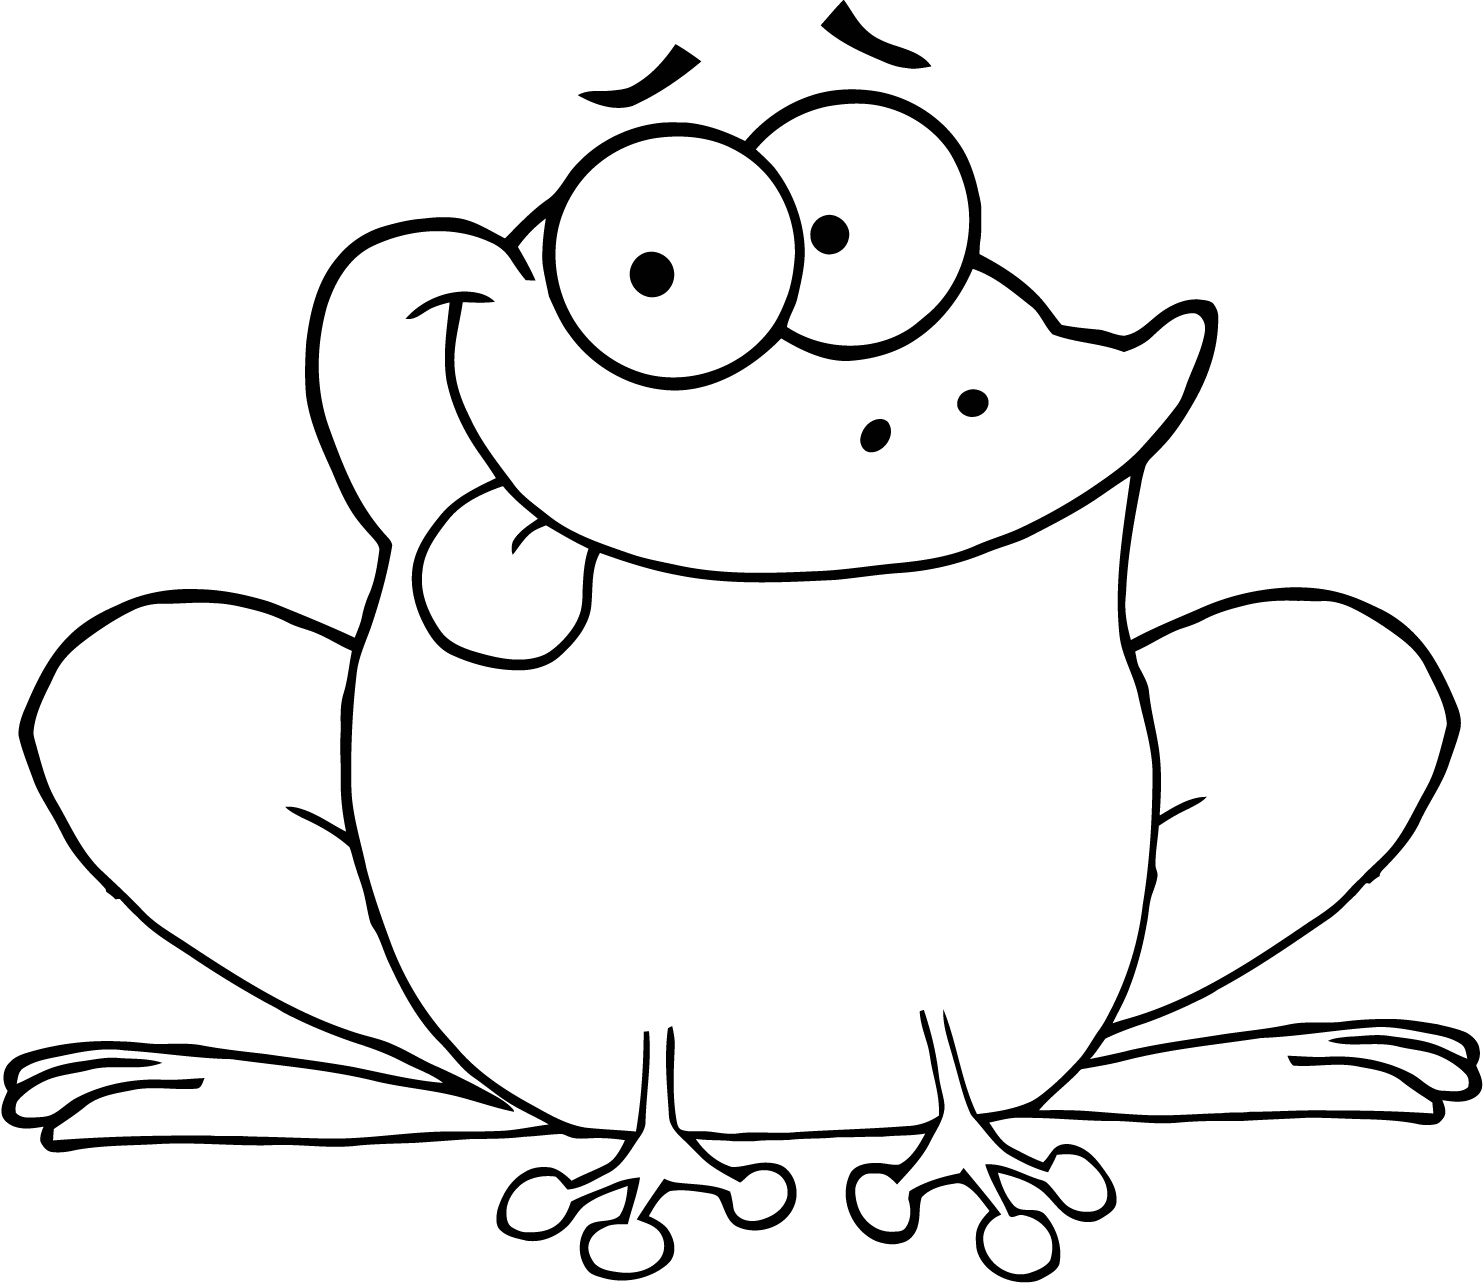 Happy frog colouring pages for preschoolers